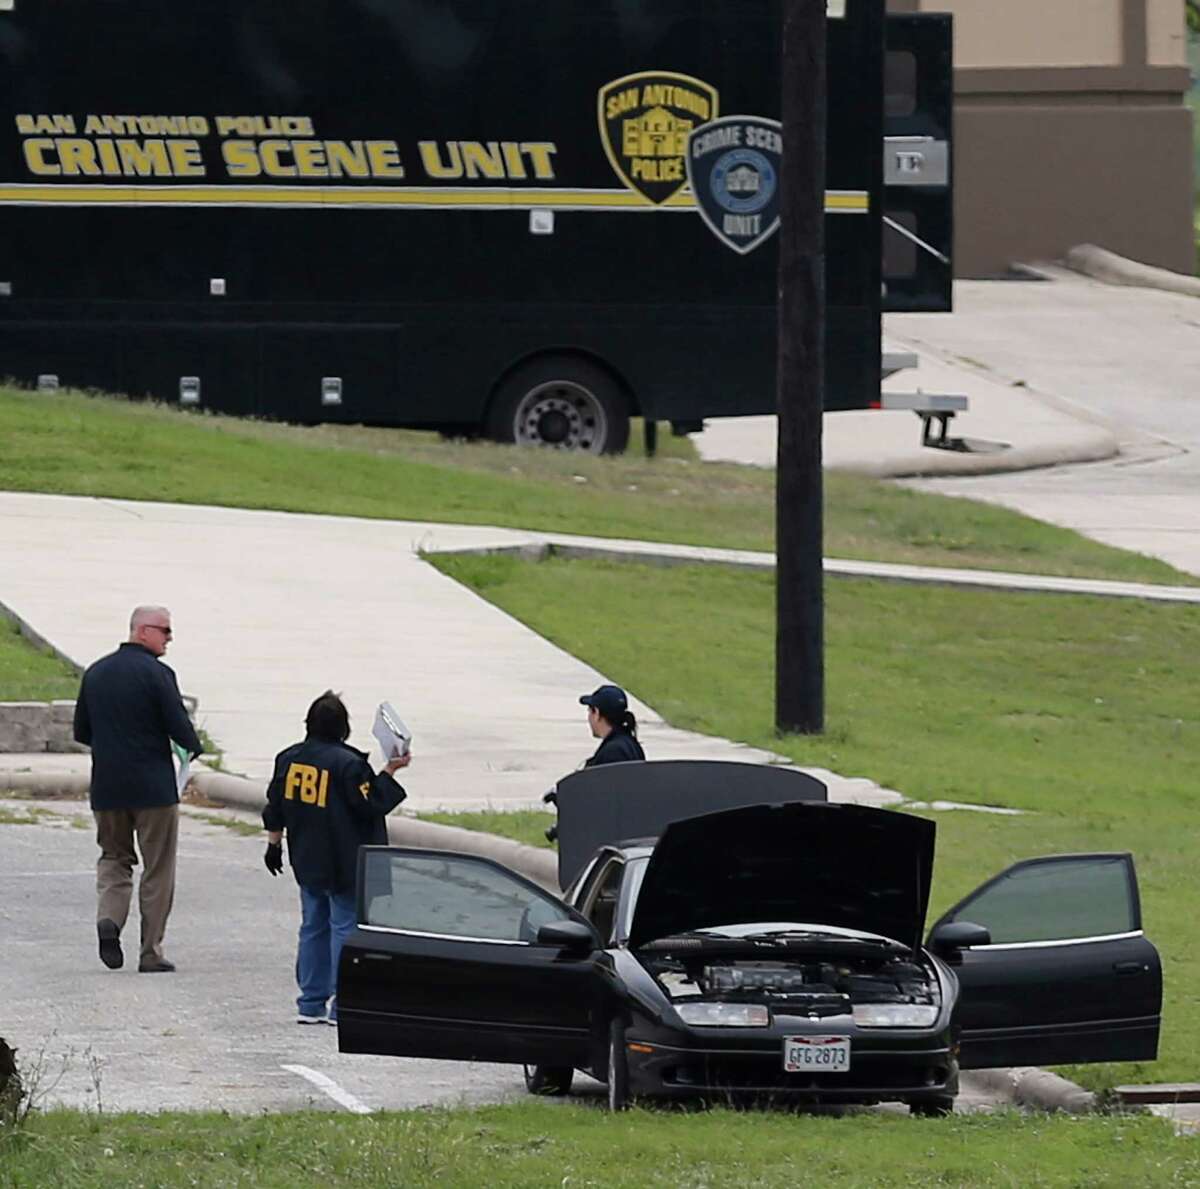 FBI personnel stand near a vehicle located inside Lackland AFB, Medina Annex on Friday, Apr. 8, 2016. Earlier, two men died in an apparent murder-suicide near Forbes Hall within the annex Friday morning that left the base locked down for nearly 2 hours, officials said. (Kin Man Hui/San Antonio Express-News)